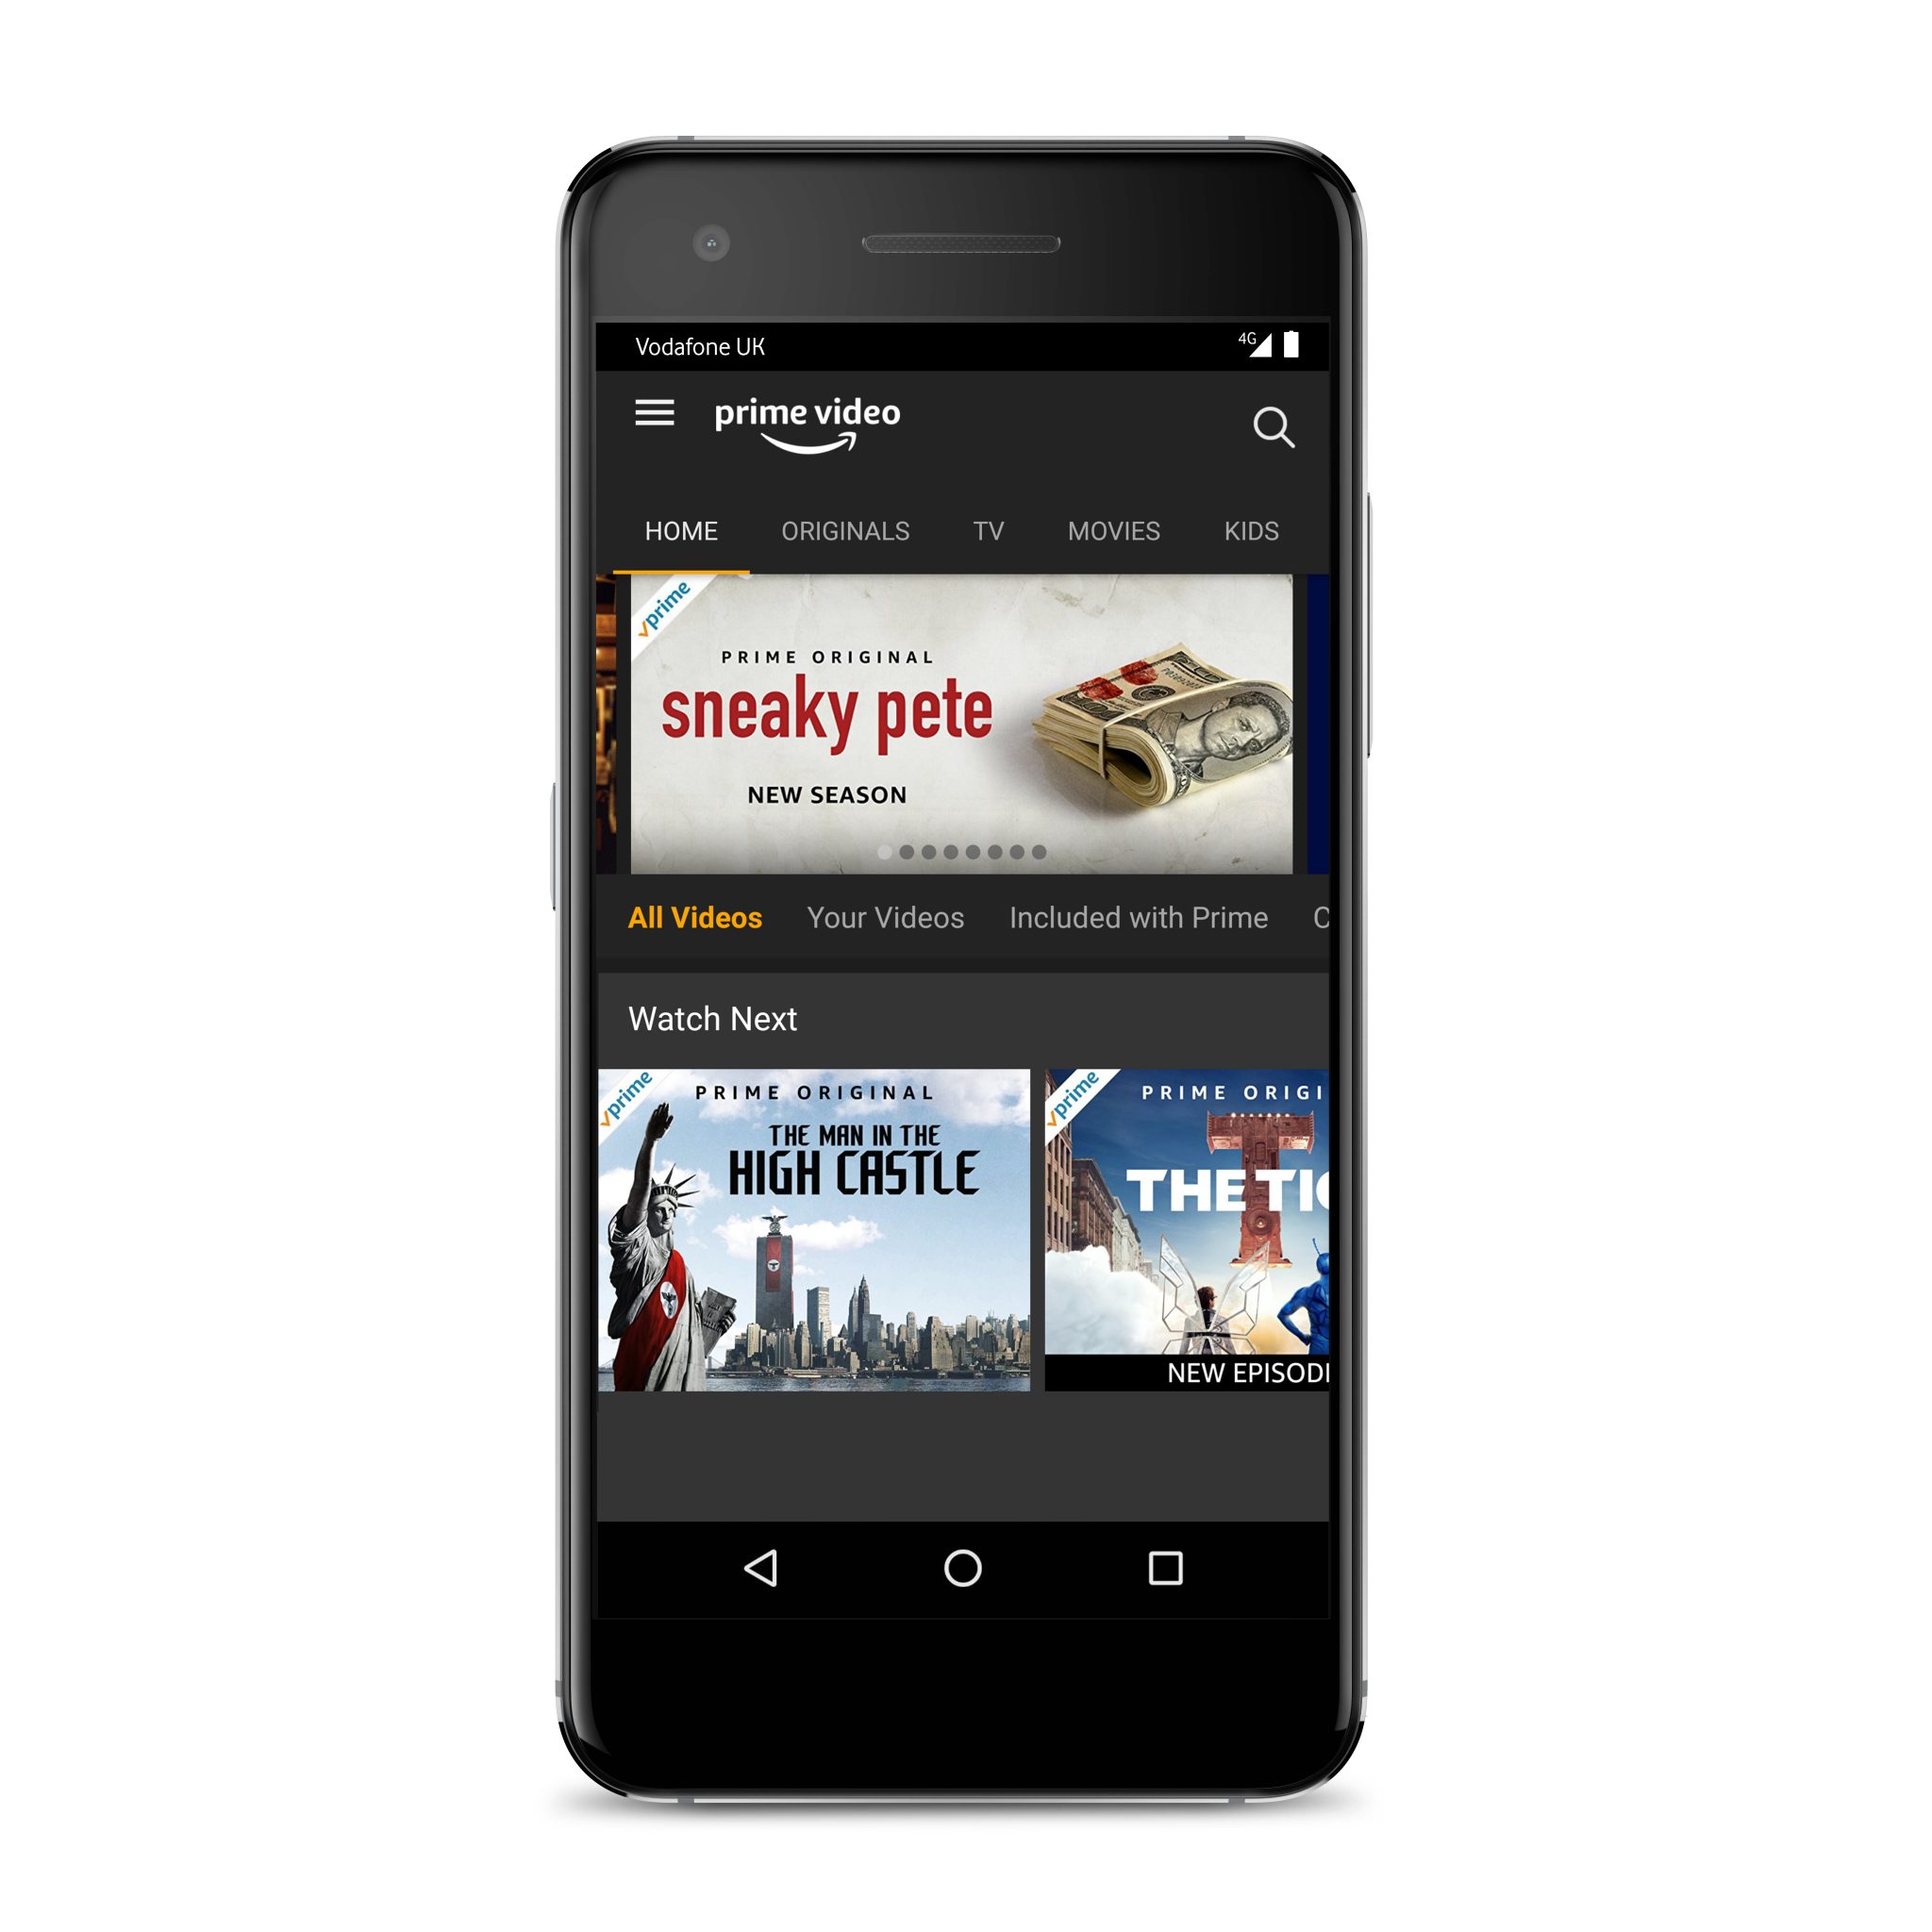 Amazon Prime Video on your mobile